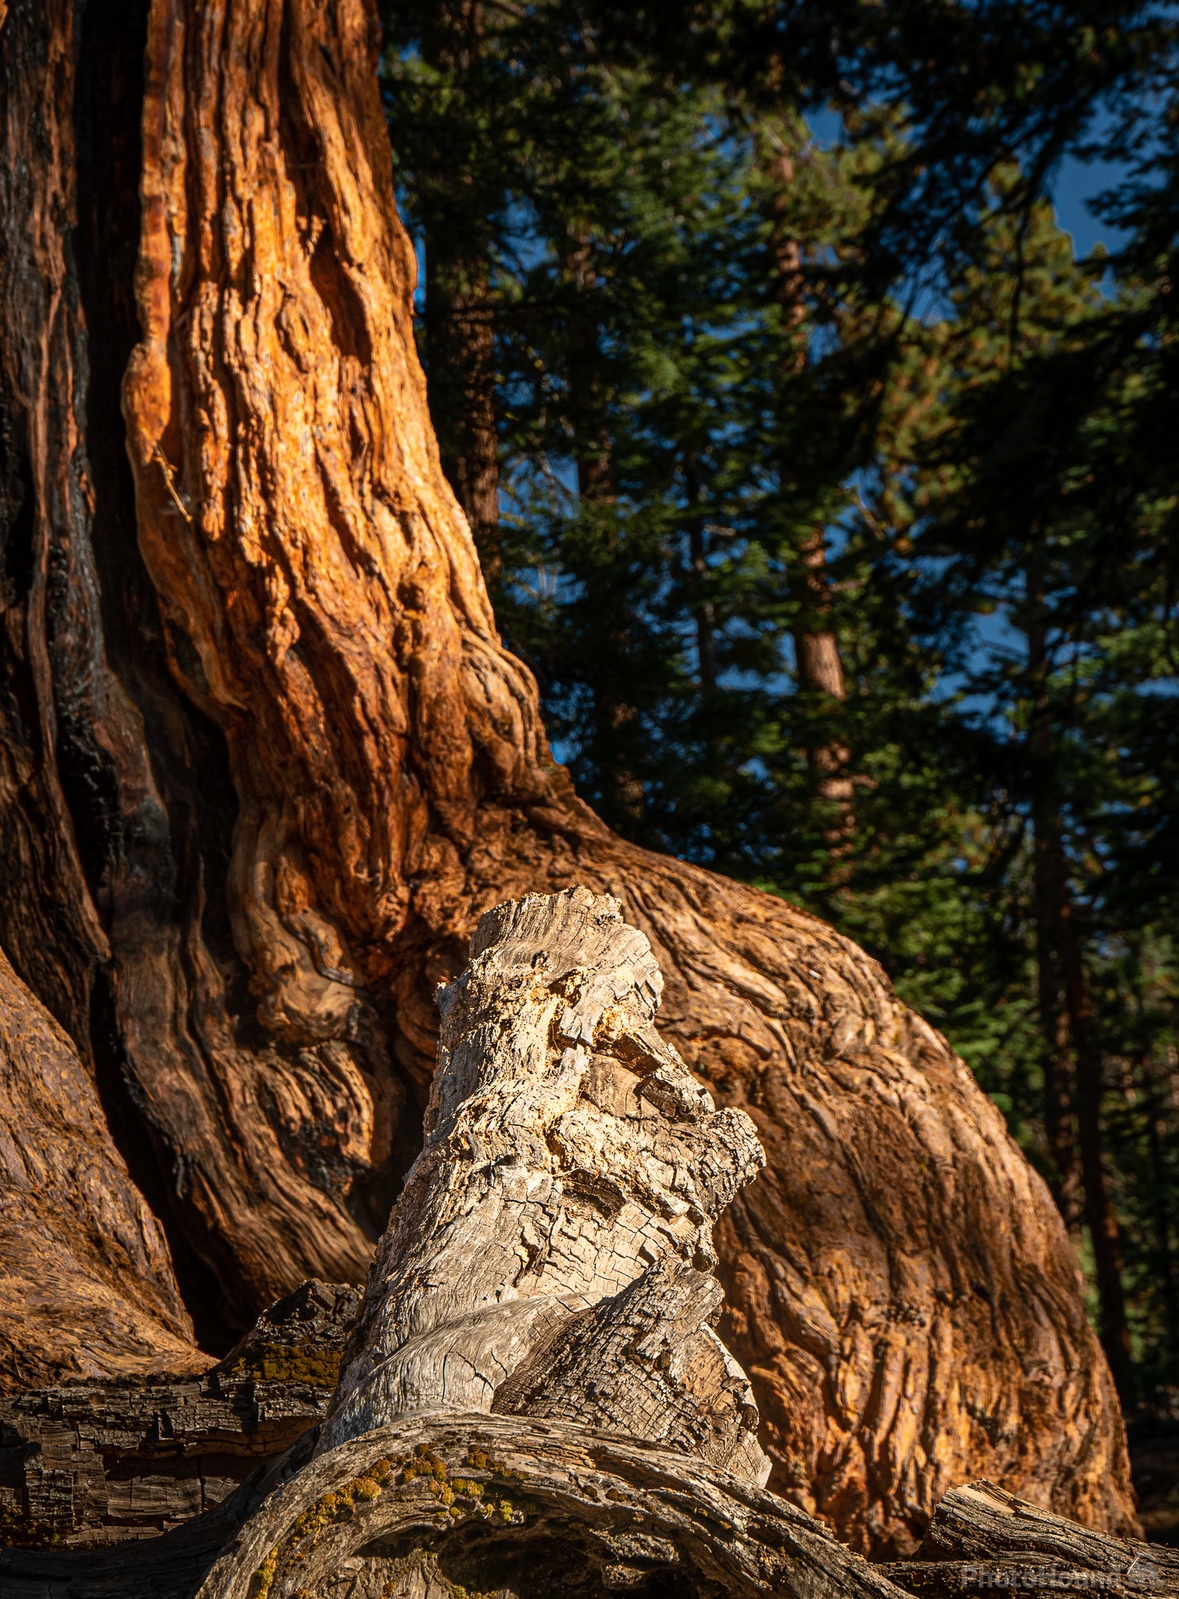 Image of Merced Grove of the Giant Sequoias by Charley Corace